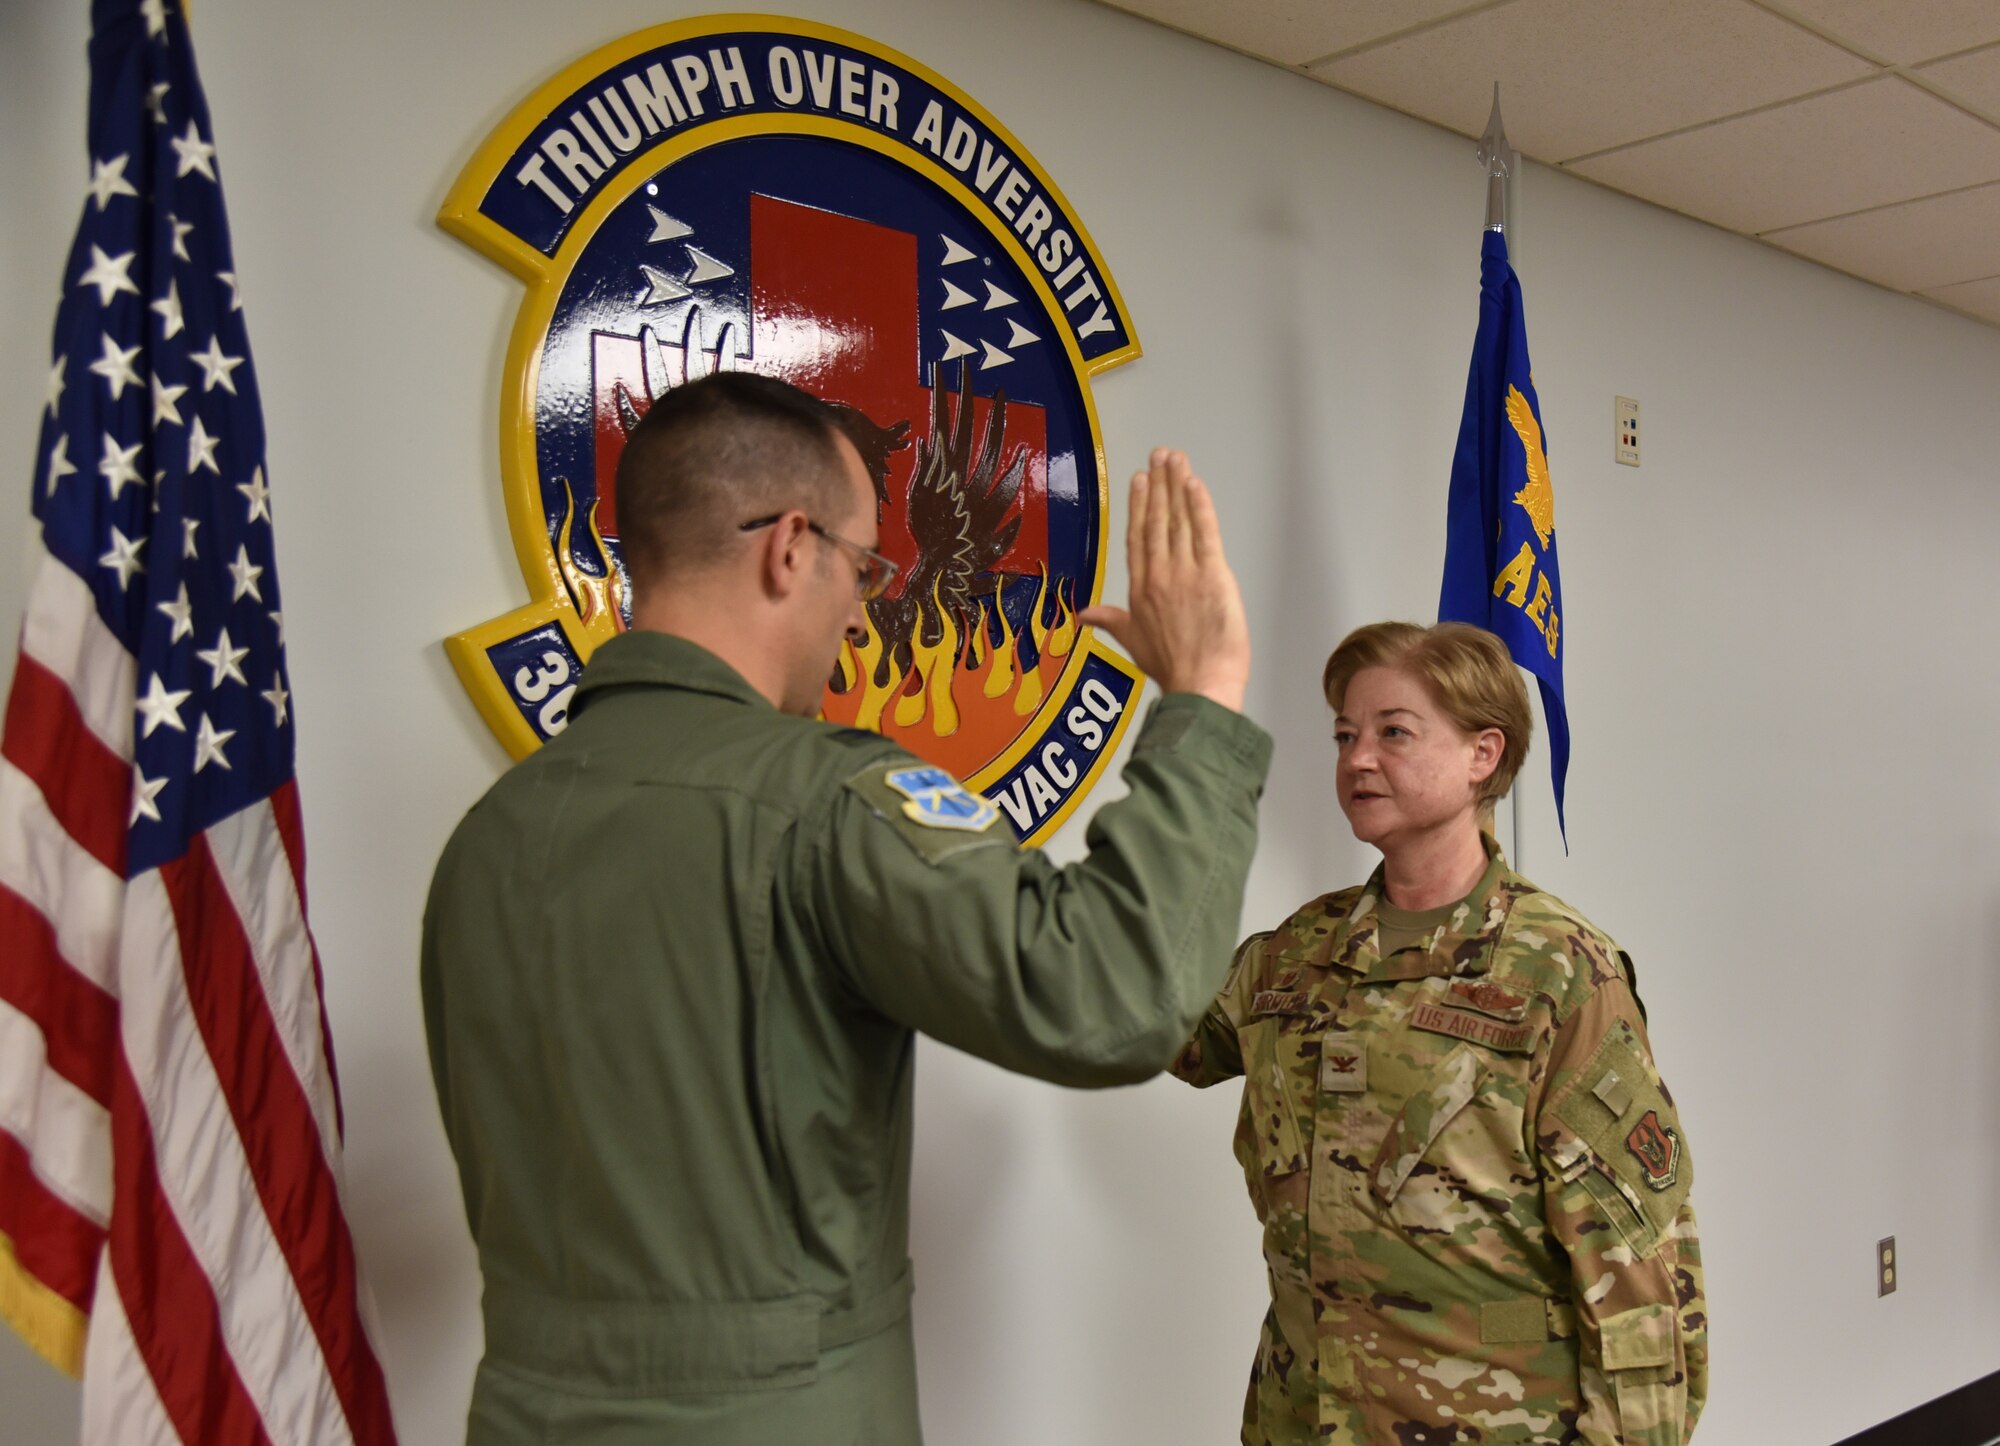 Col. Kevin Campanile on right side stands with his right hand raised to swear in Col. Ladonna Schreffler, on left side, for her promotion to colonel.